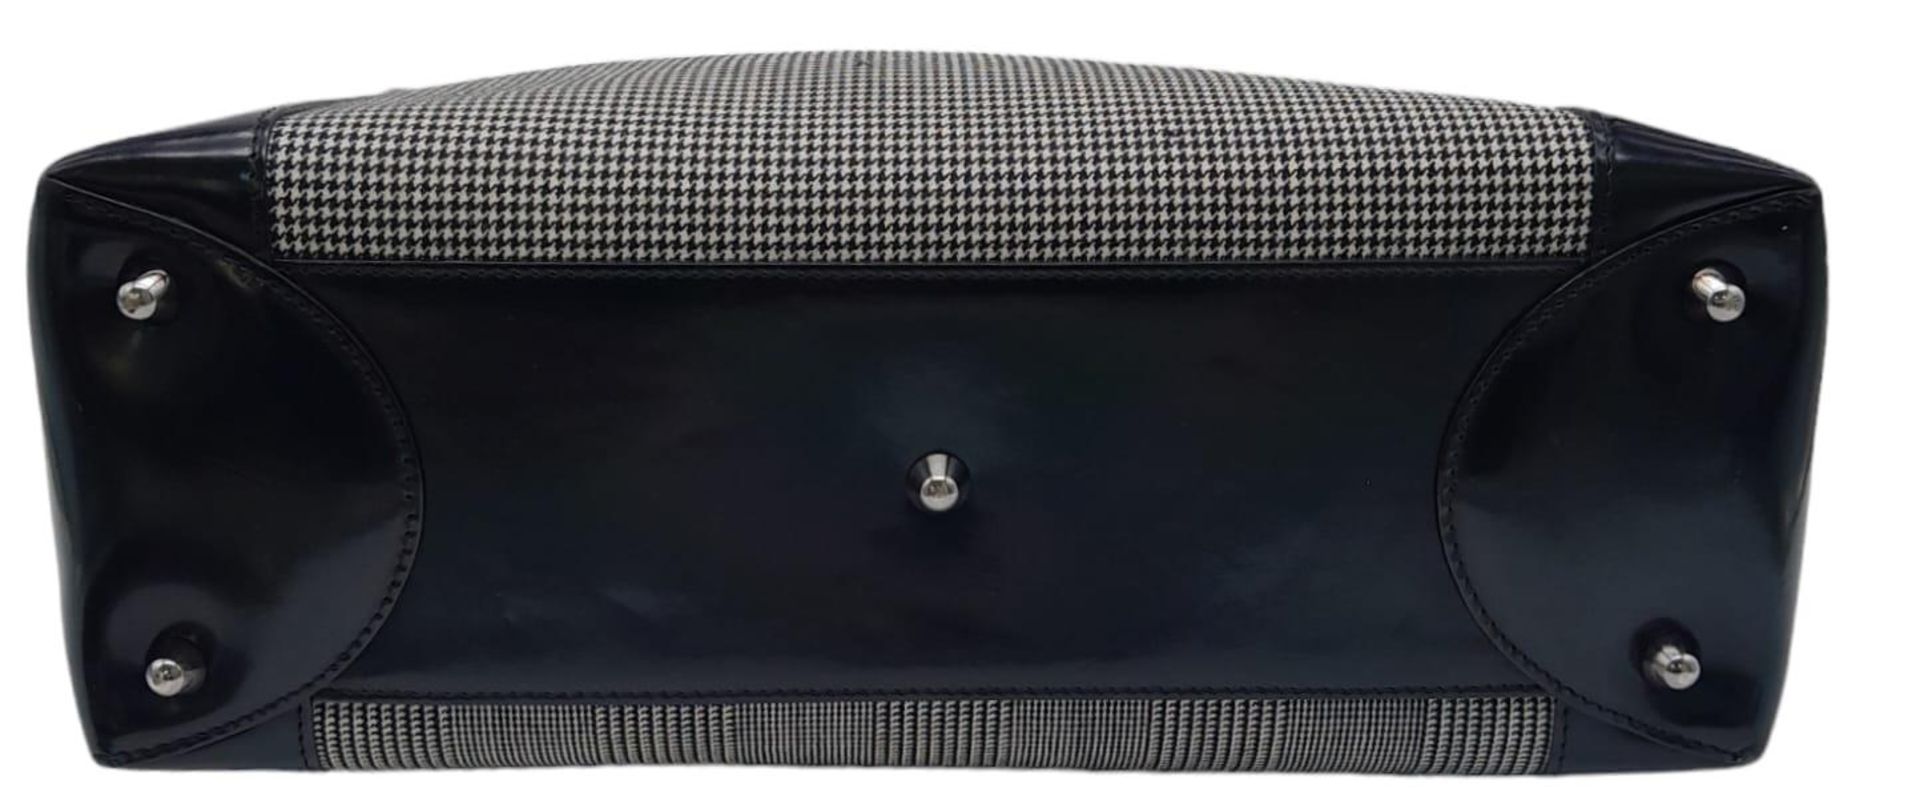 A Christian Dior - Lady Dior Bag. Canvas and black patent leather exterior. Silver tone hardware. - Image 4 of 9